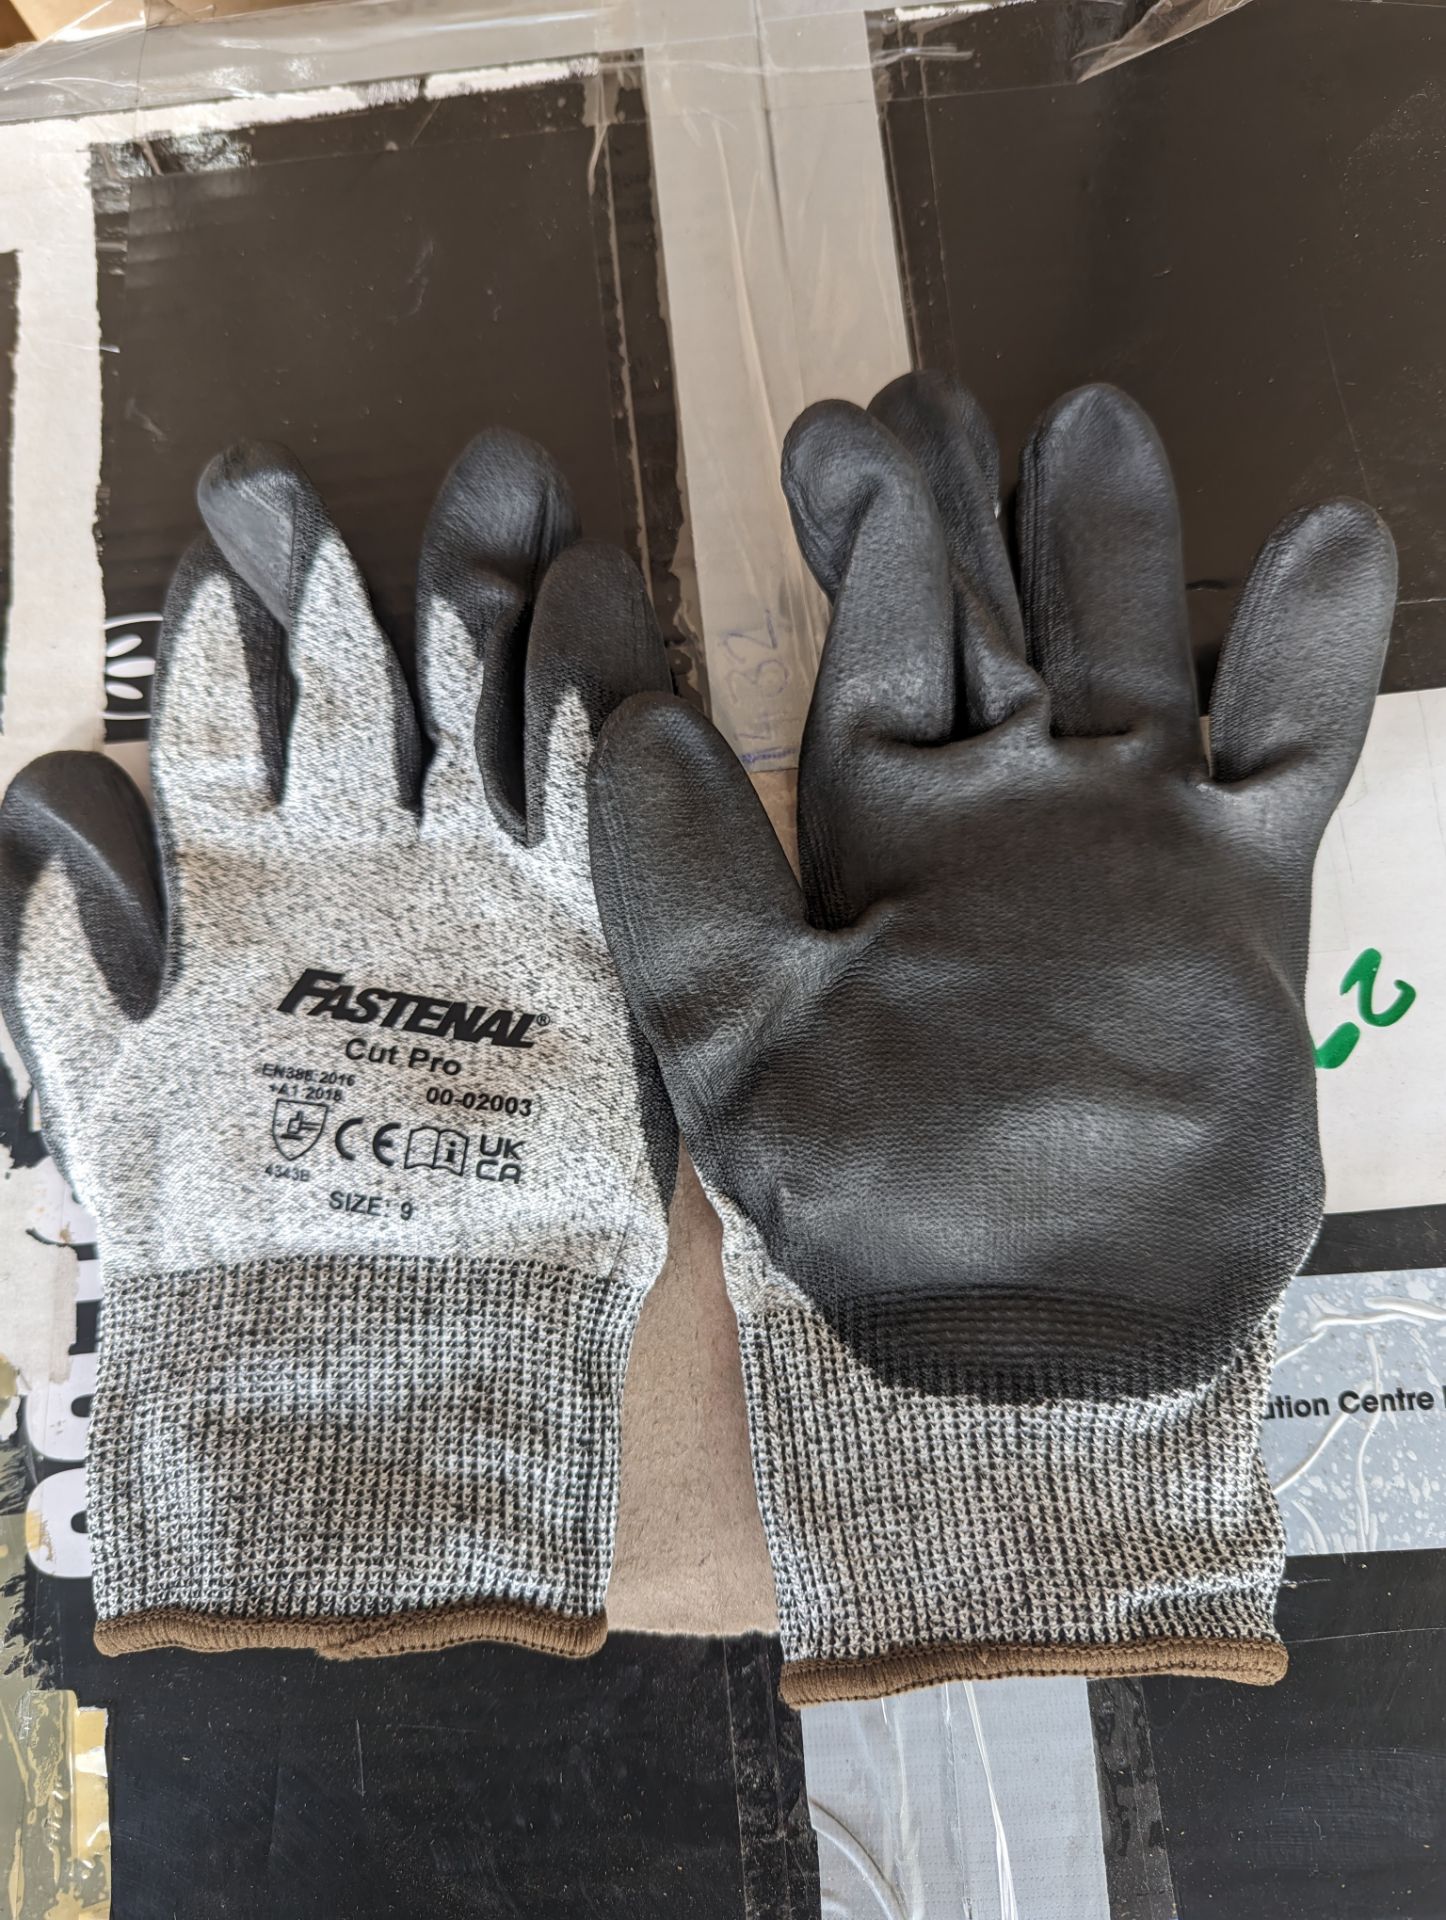 Fasternal Cut resistant gloves - Image 3 of 4